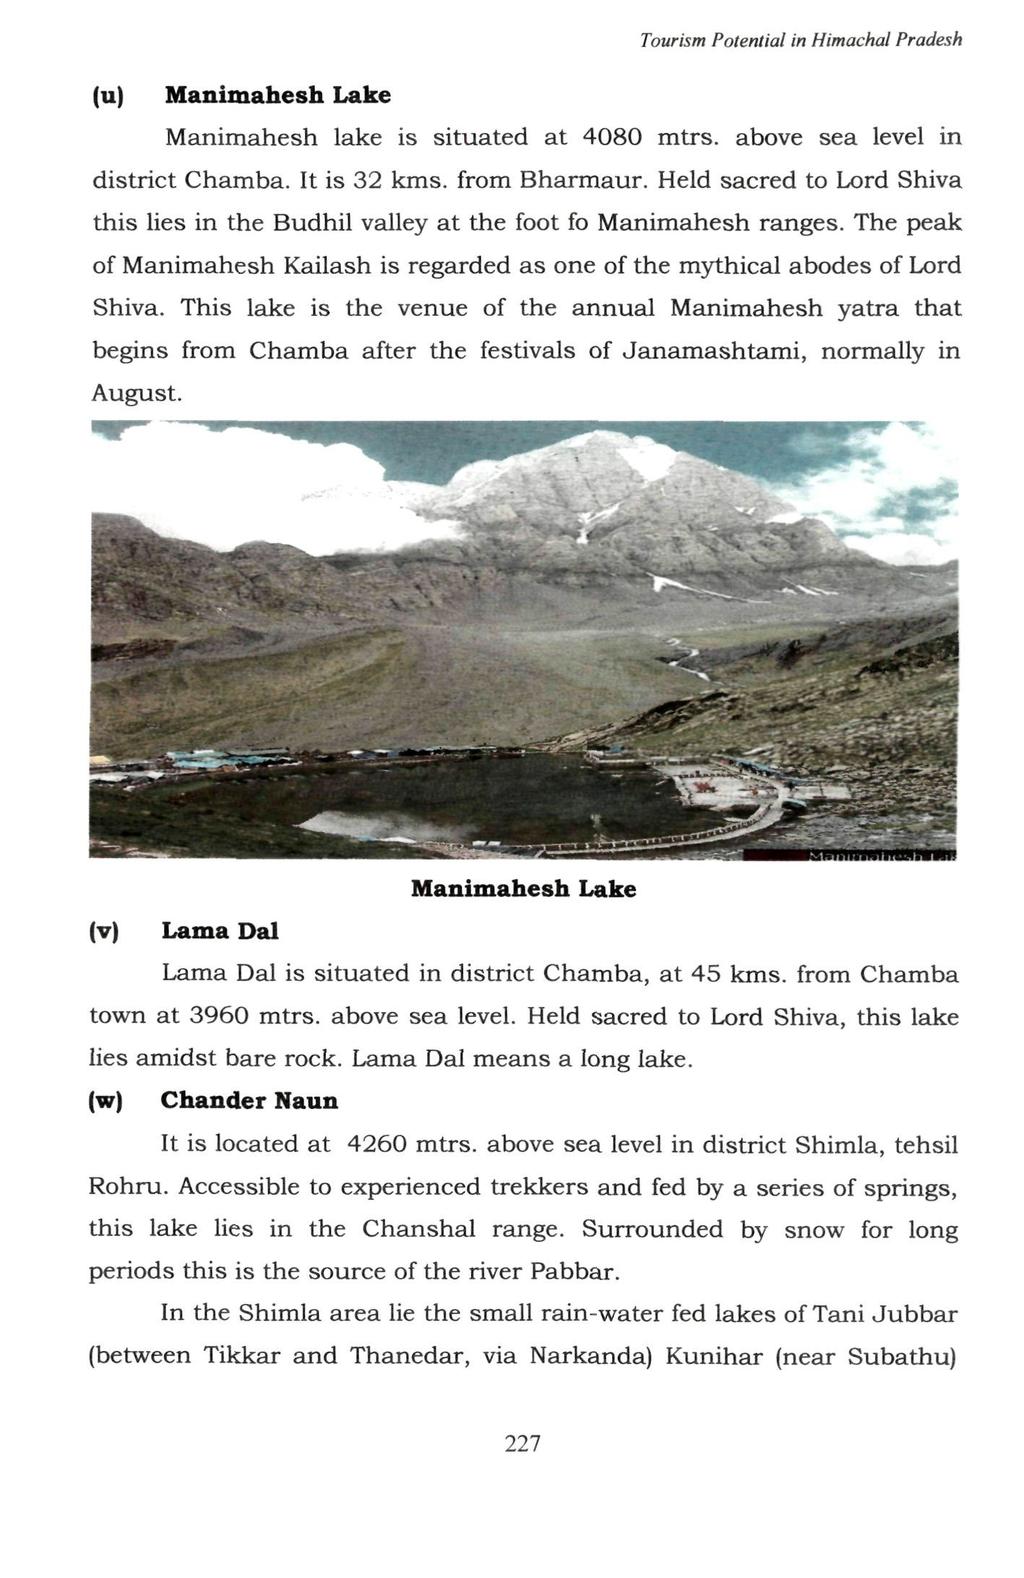 (u) Manimahesh Lake Manimahesh lake is situated at 4080 mtrs. abve sea level in district Chamba. It is 32 kms. frm Bharmaur.